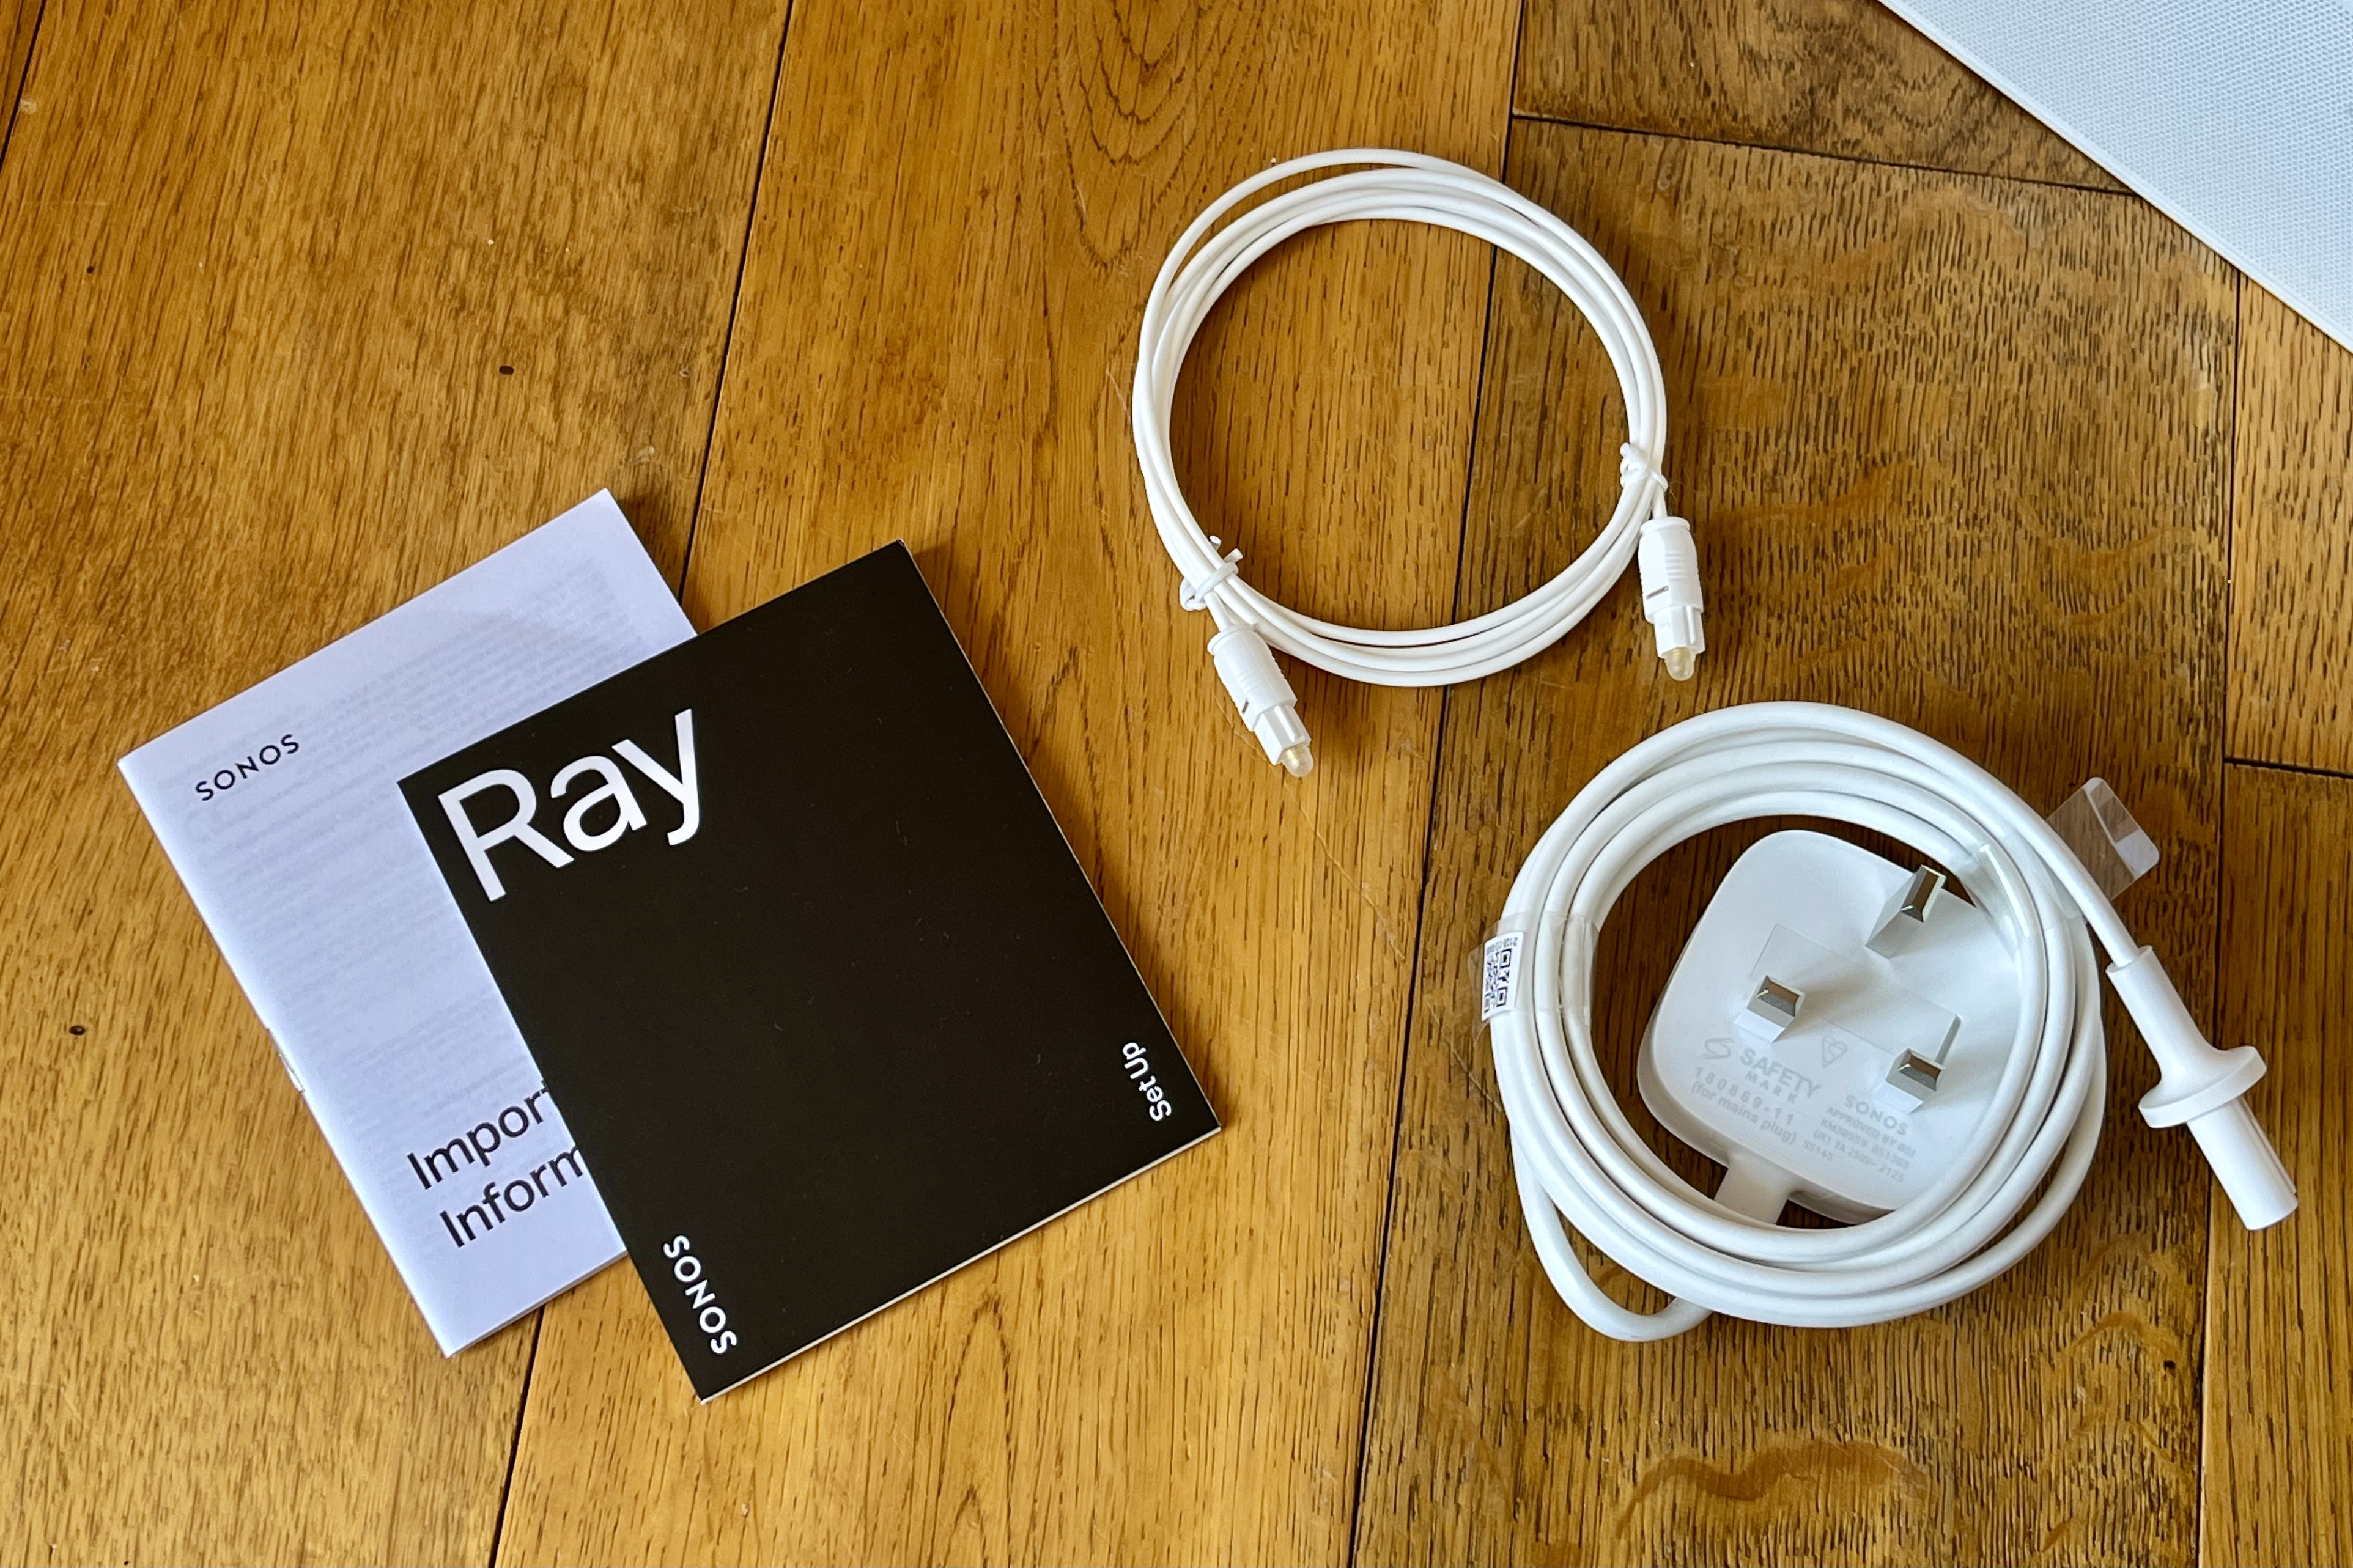 Sonos ray review